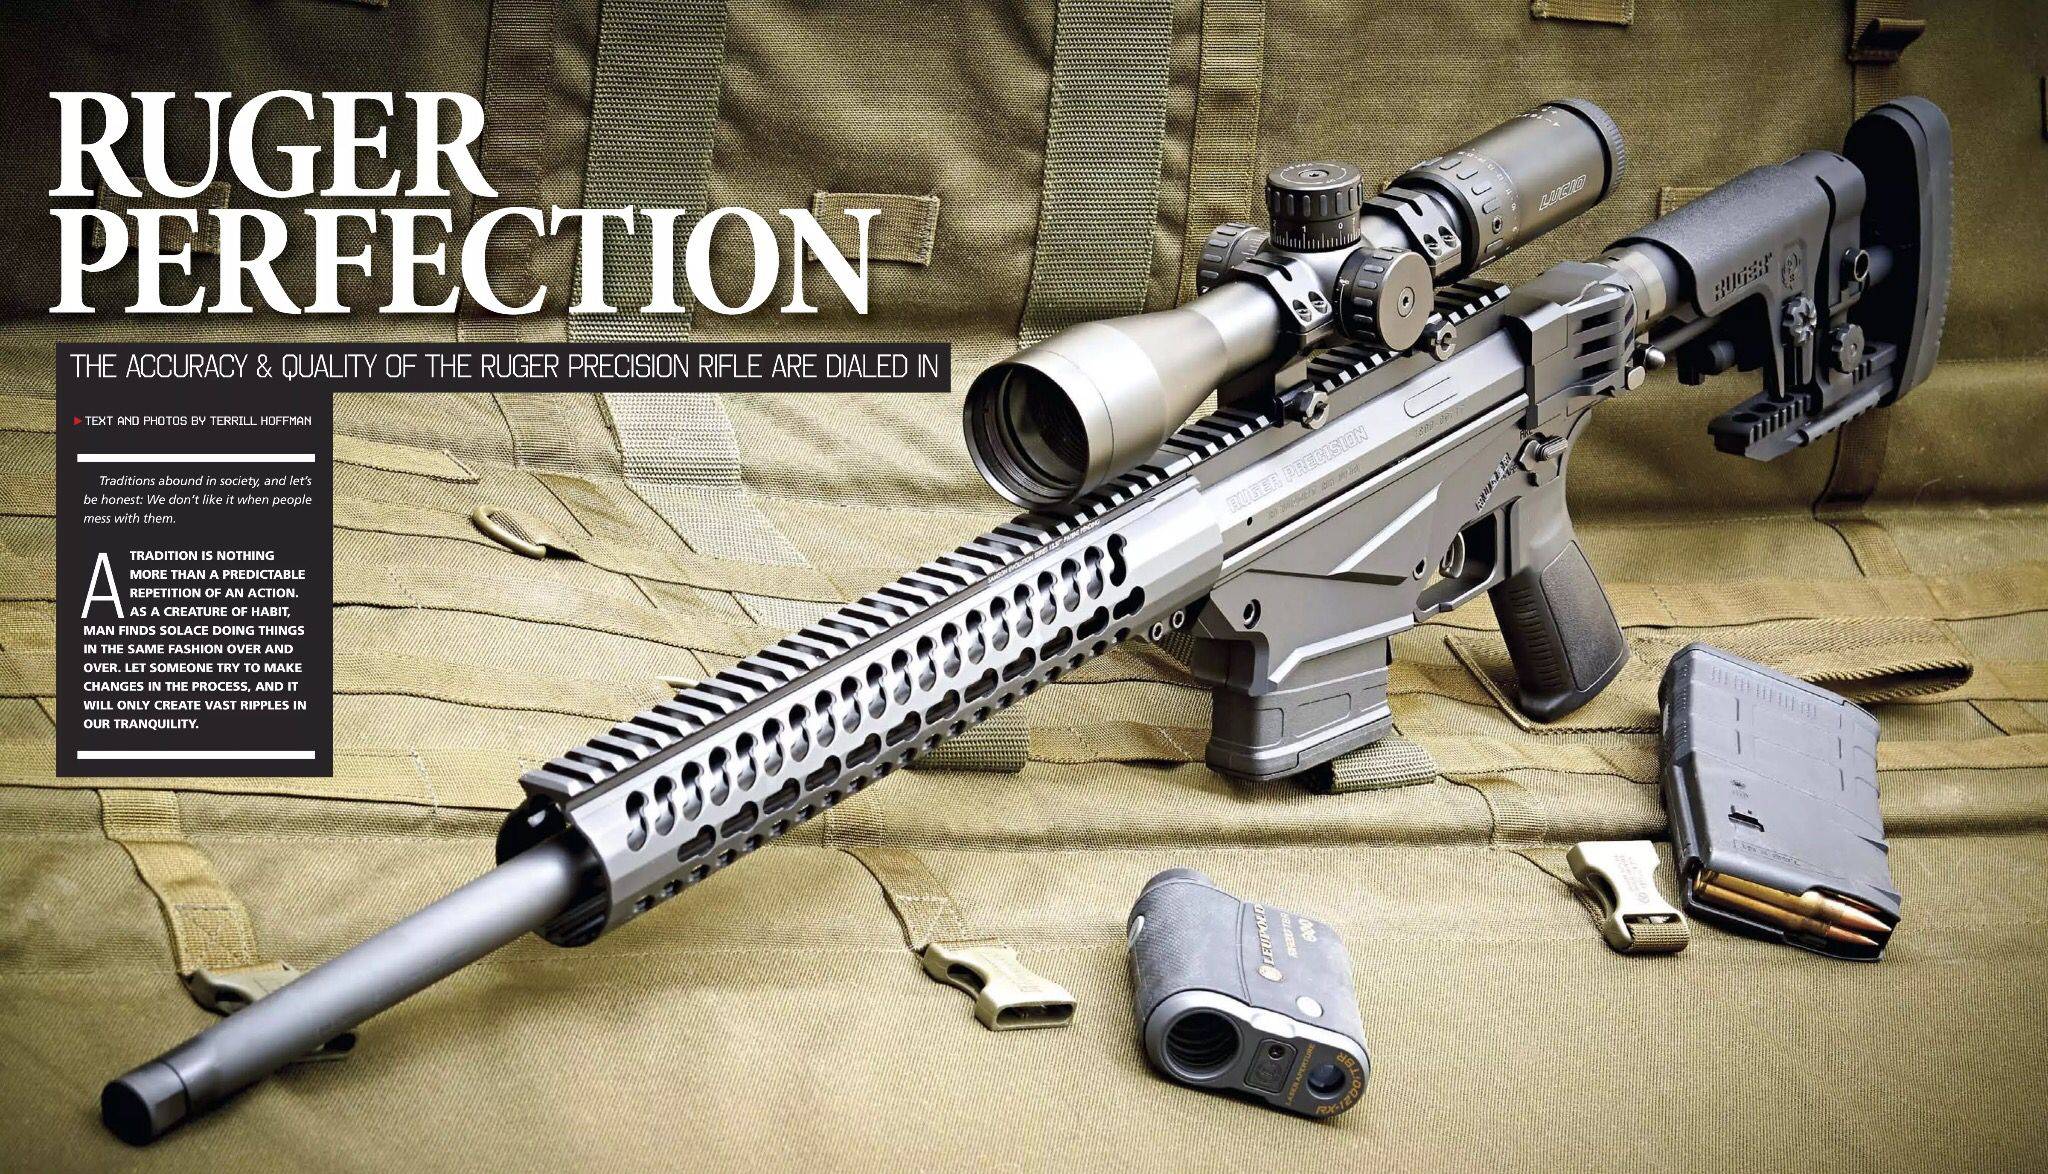 Ruger precision rifle review